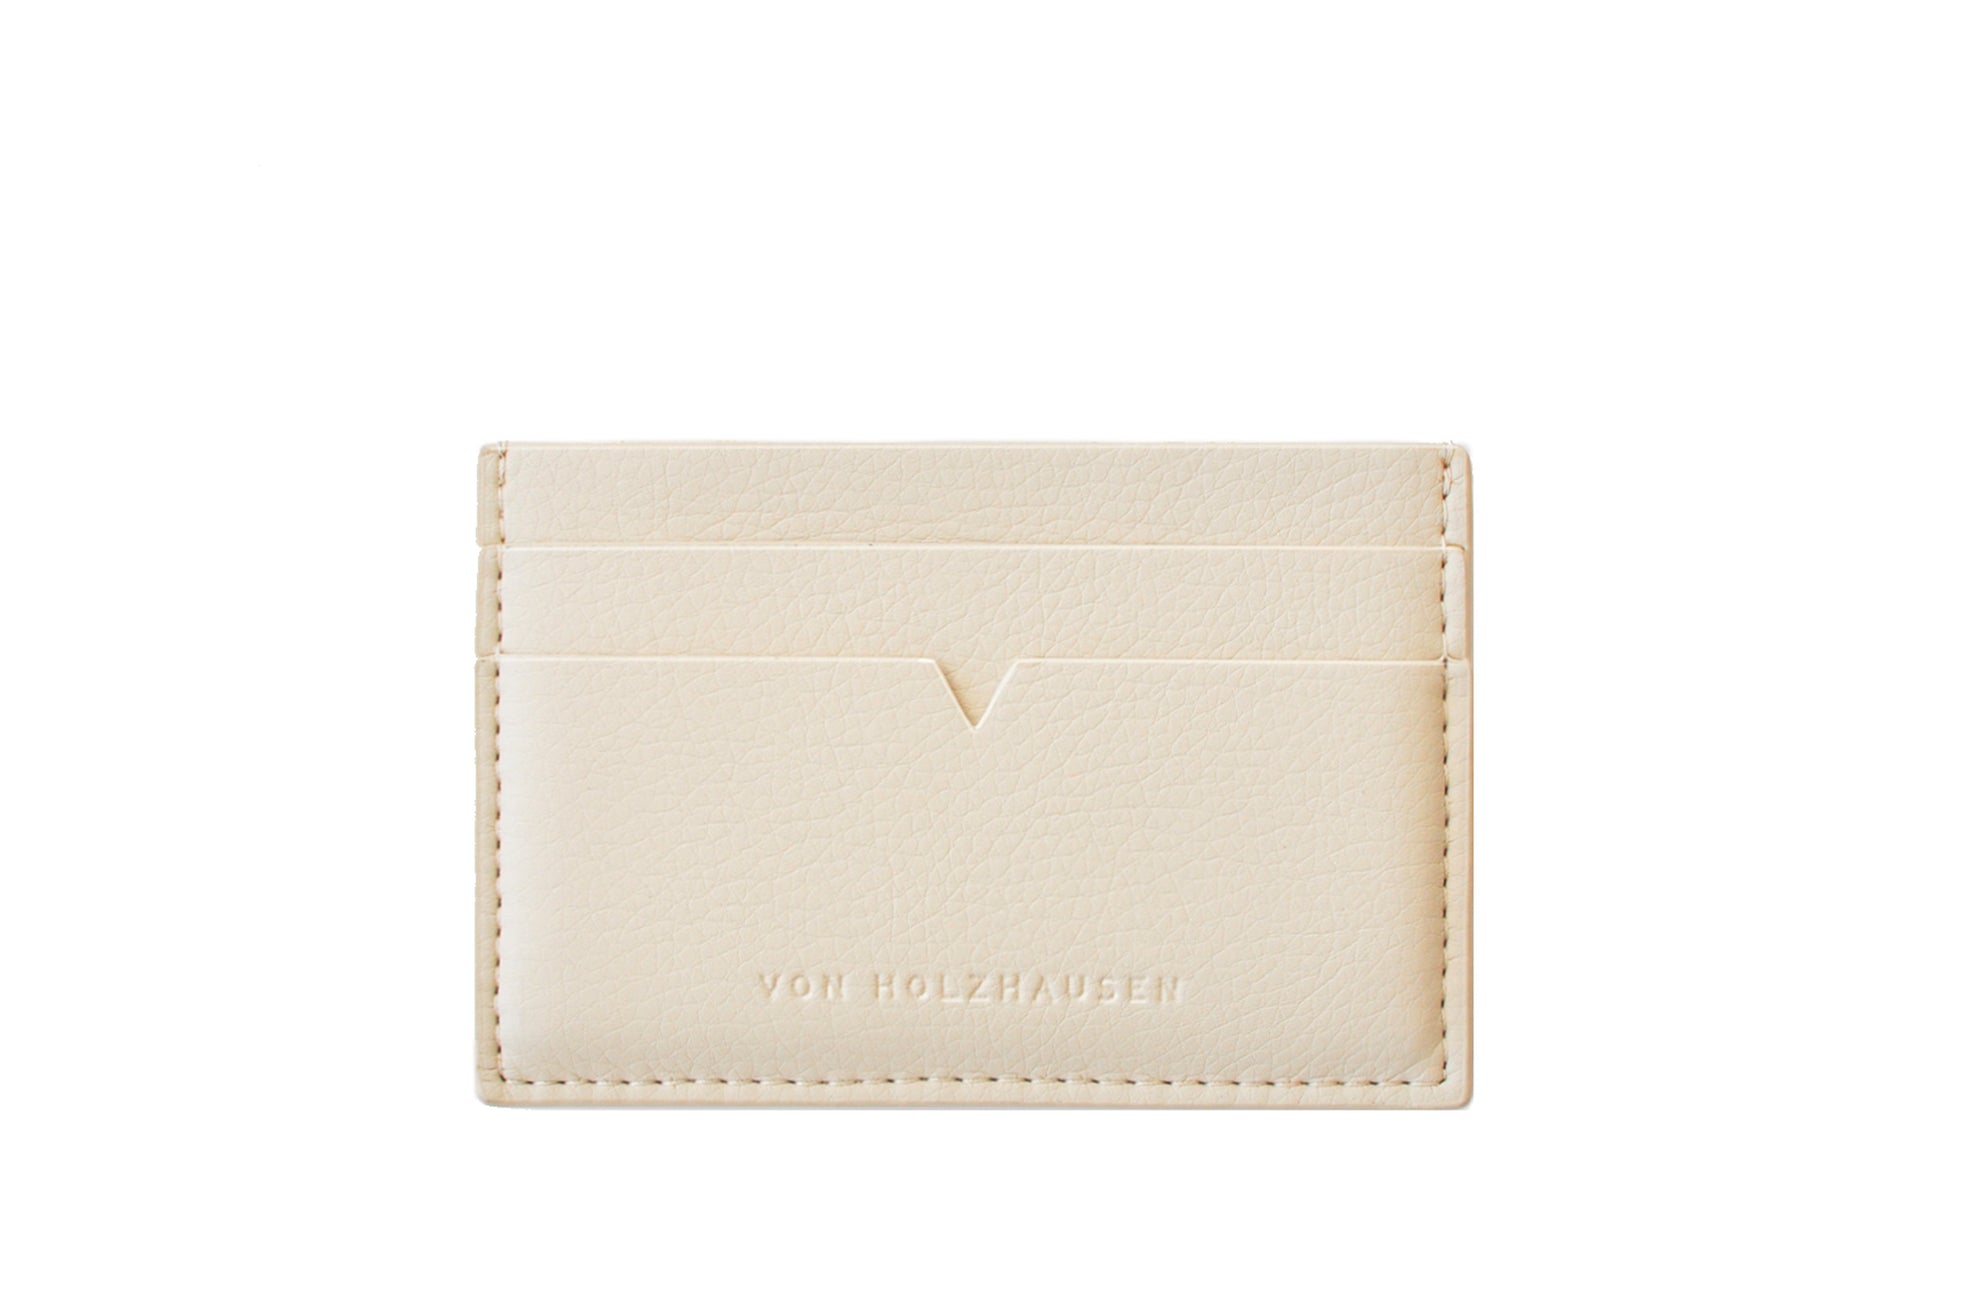 The Credit Card Holder in Technik-Leather in Oat image 1